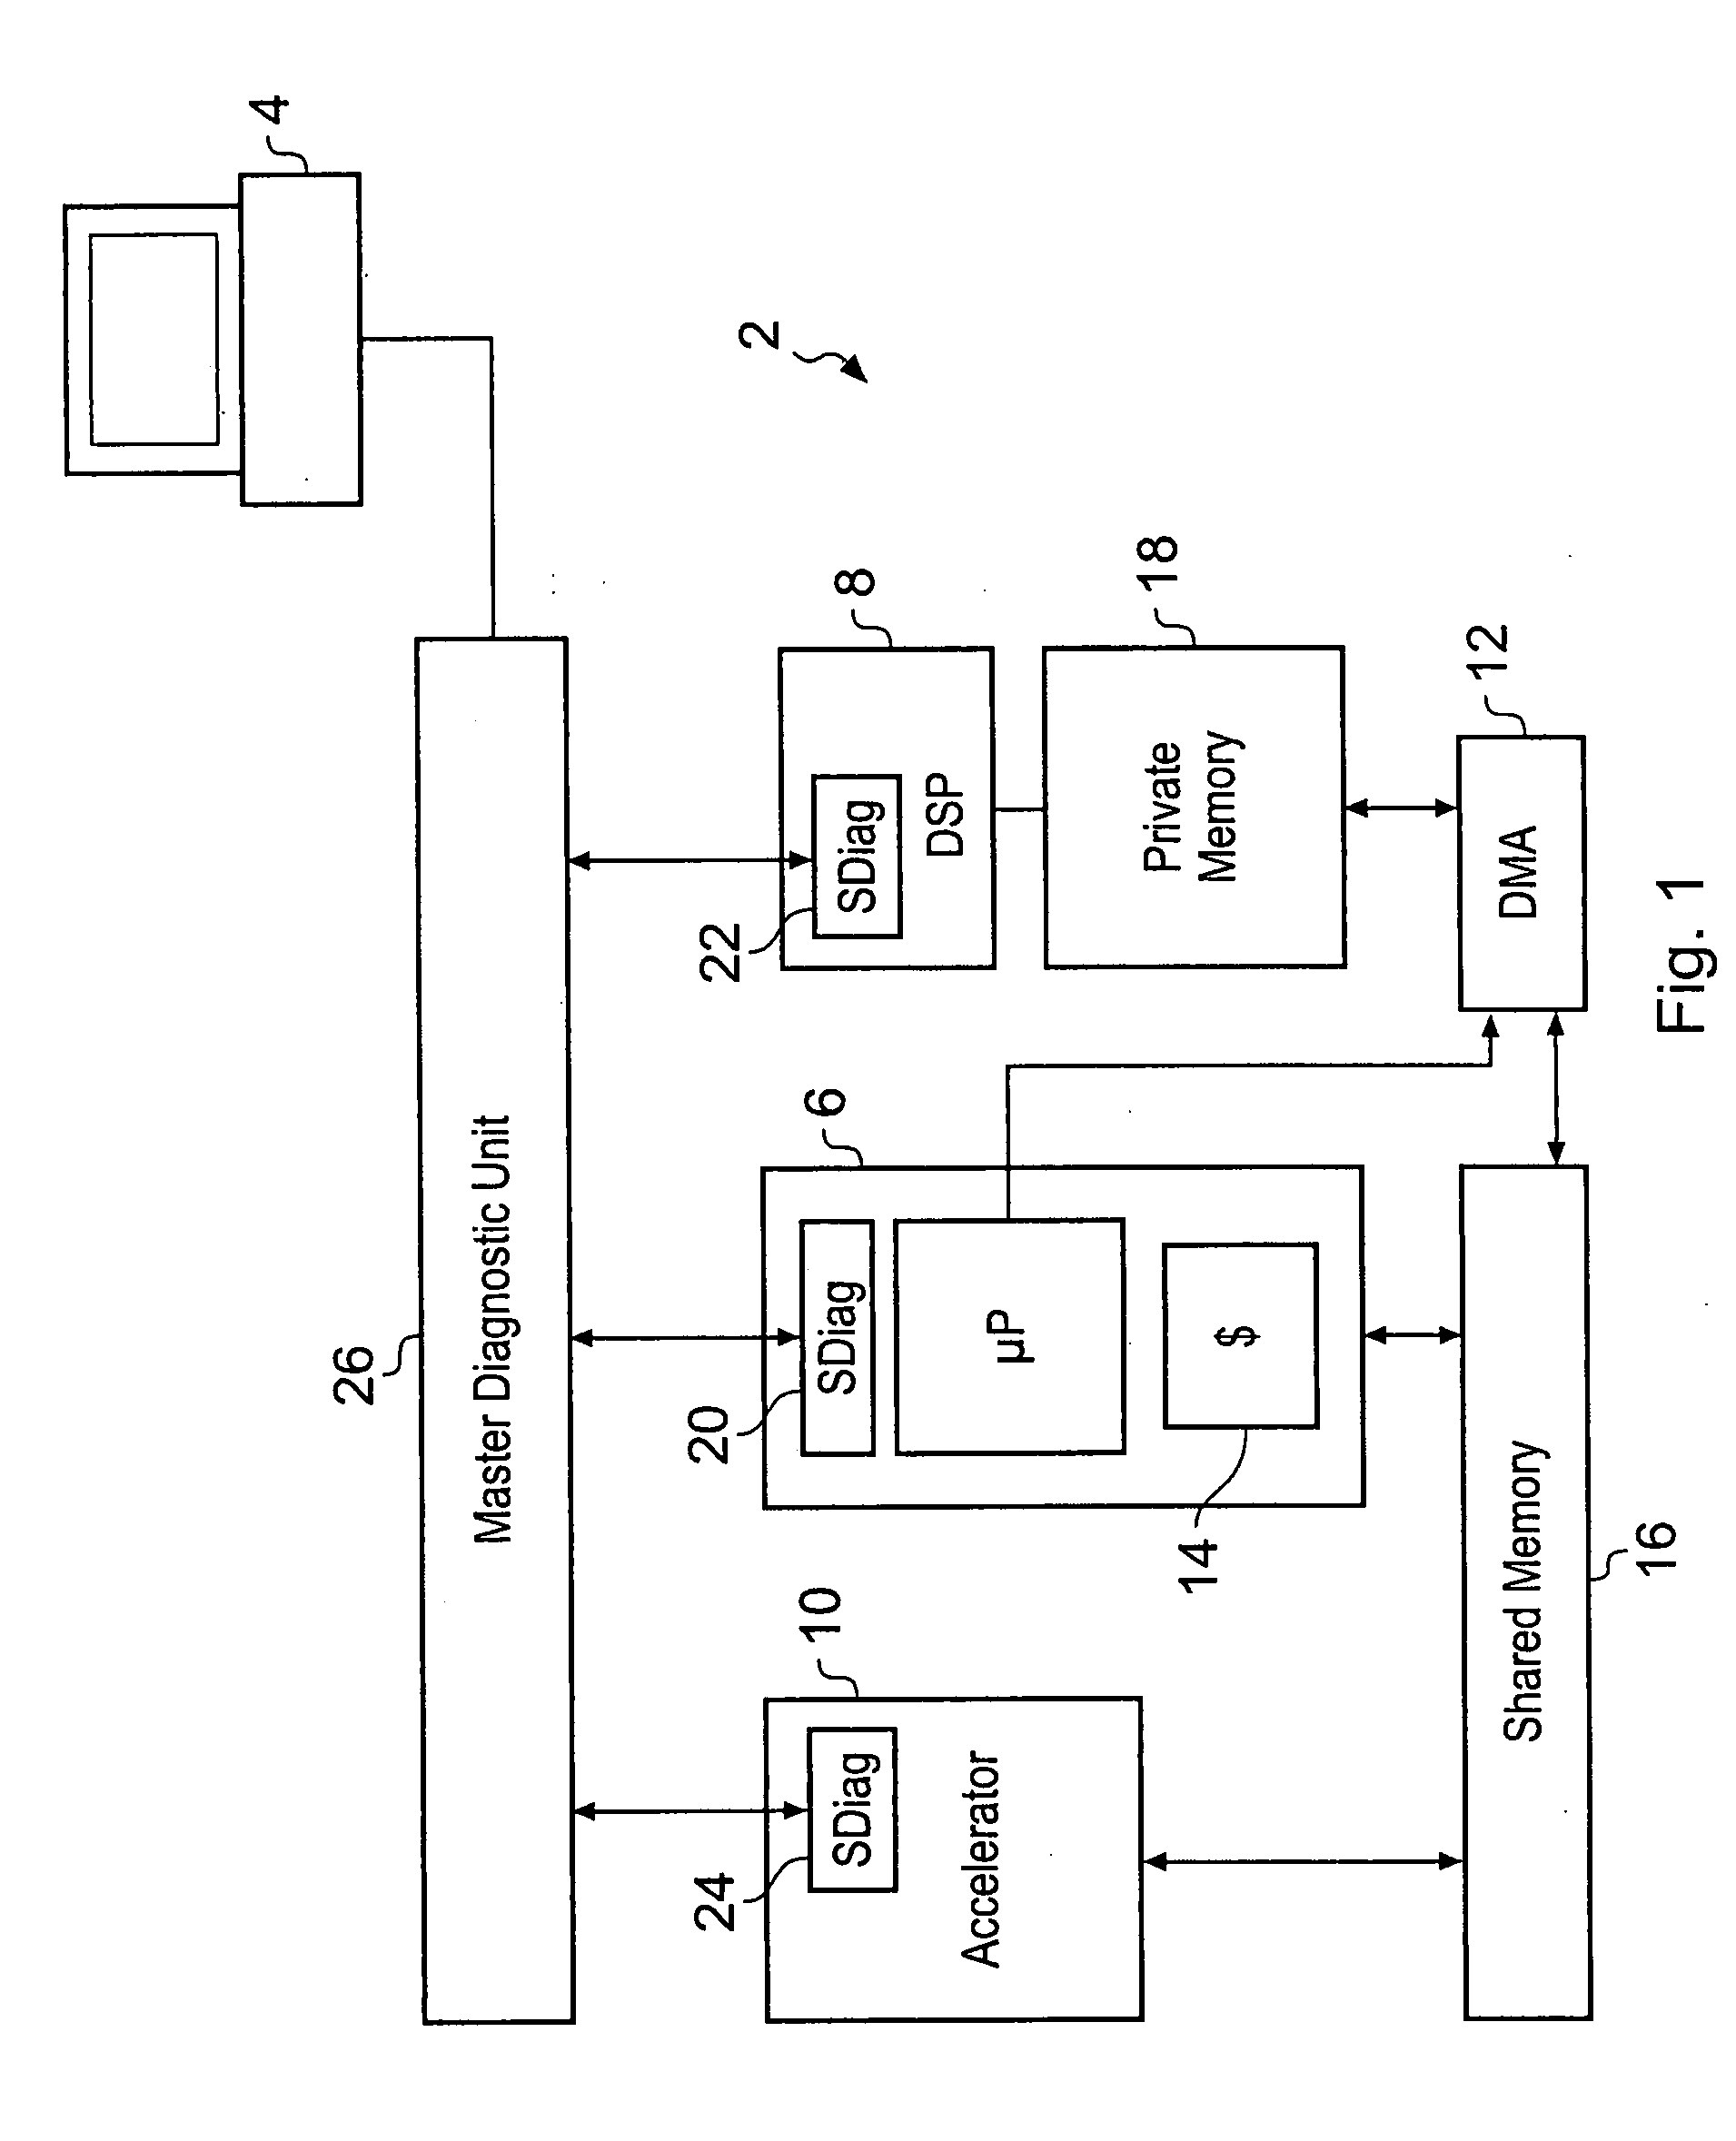 Performing diagnostic operations upon an asymmetric multiprocessor apparatus